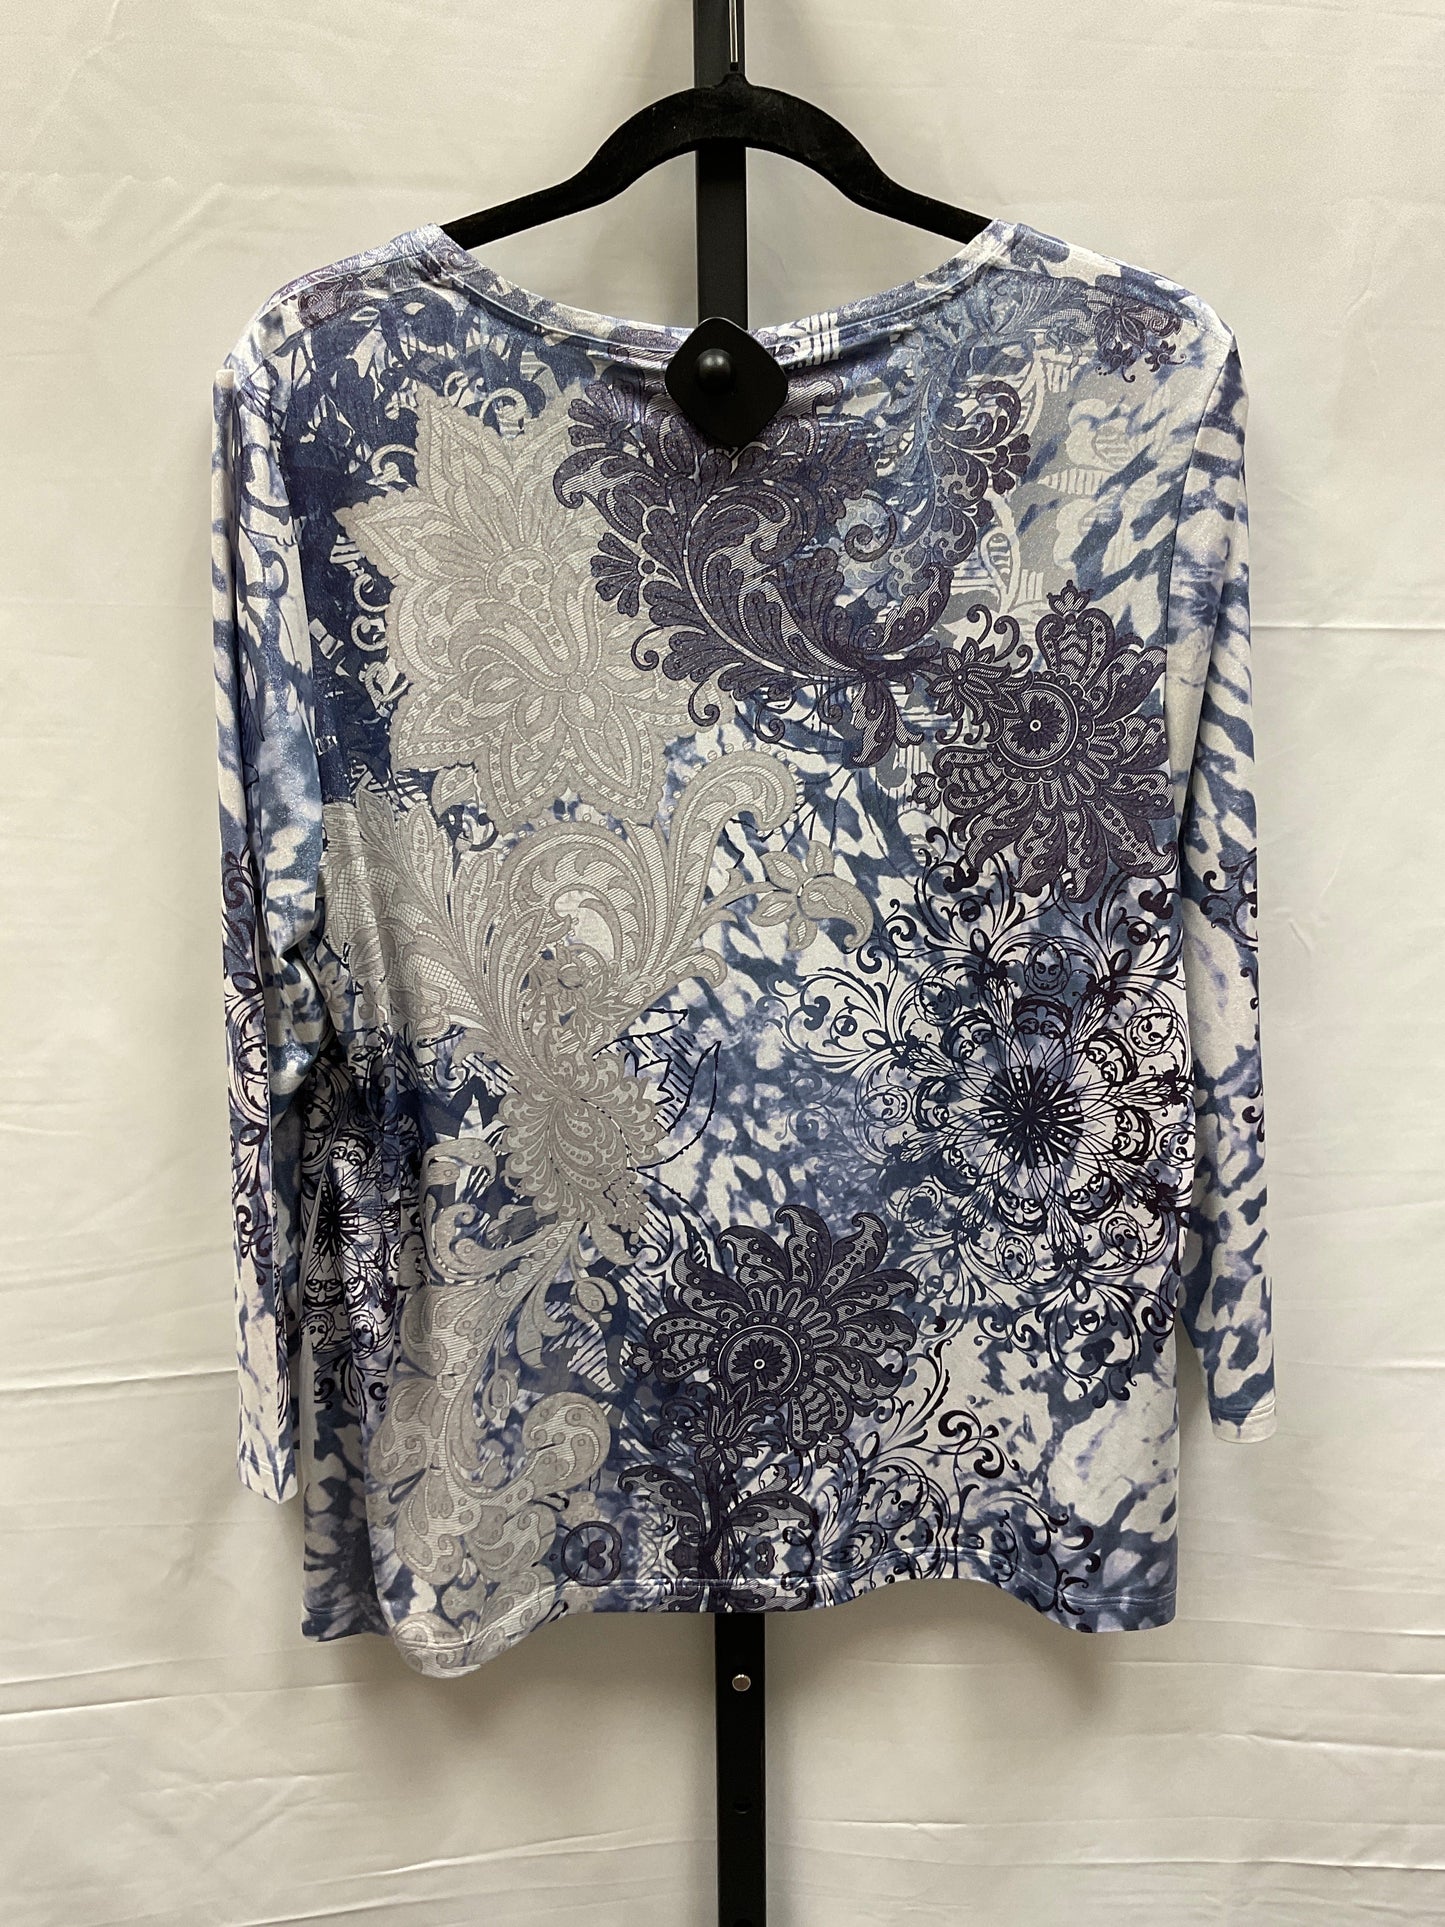 Blue & Silver Top 3/4 Sleeve Zenergy By Chicos, Size L